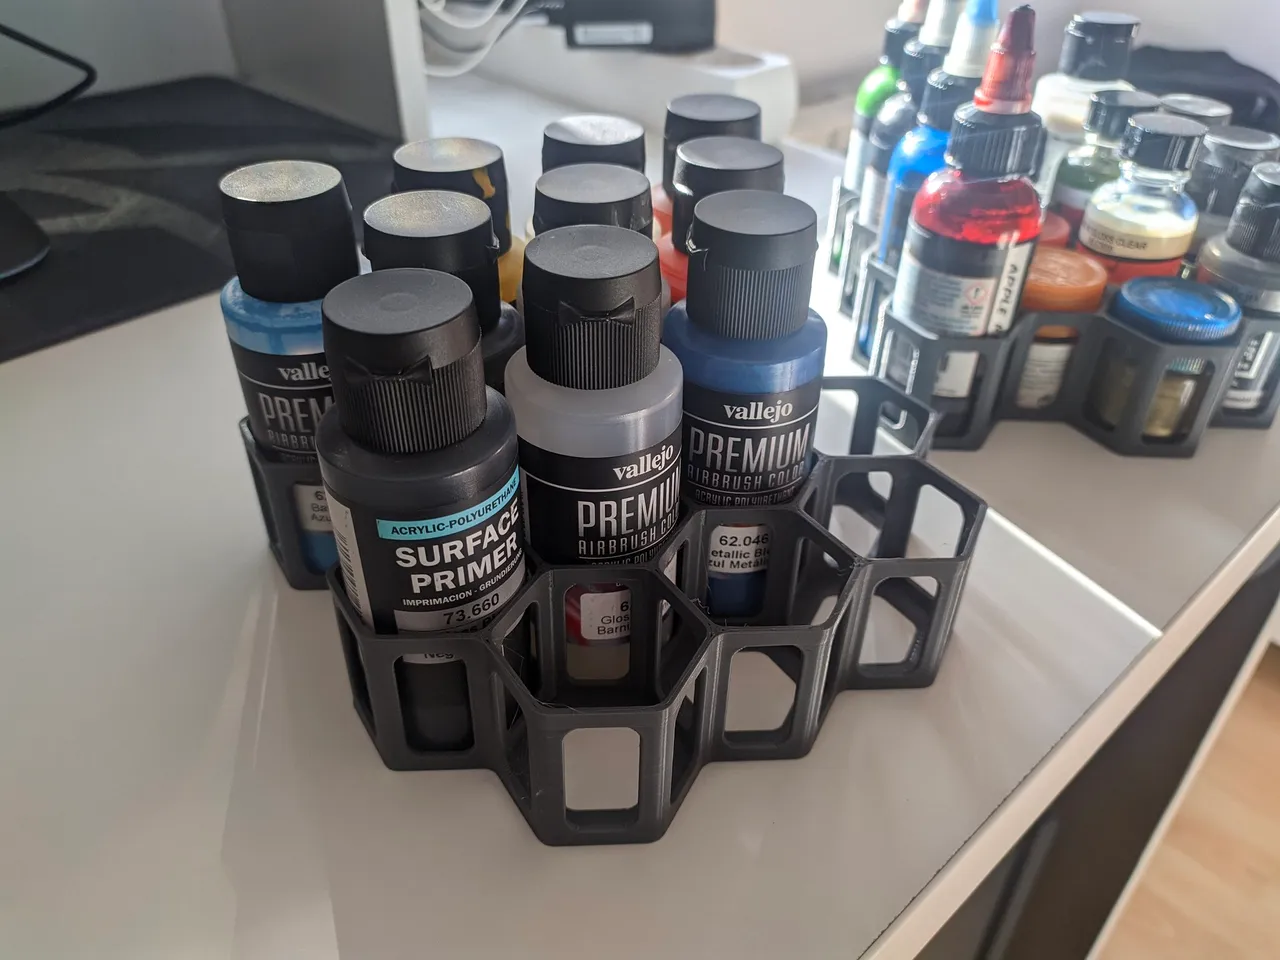 Primers 200ml Archives - Everything Airbrush